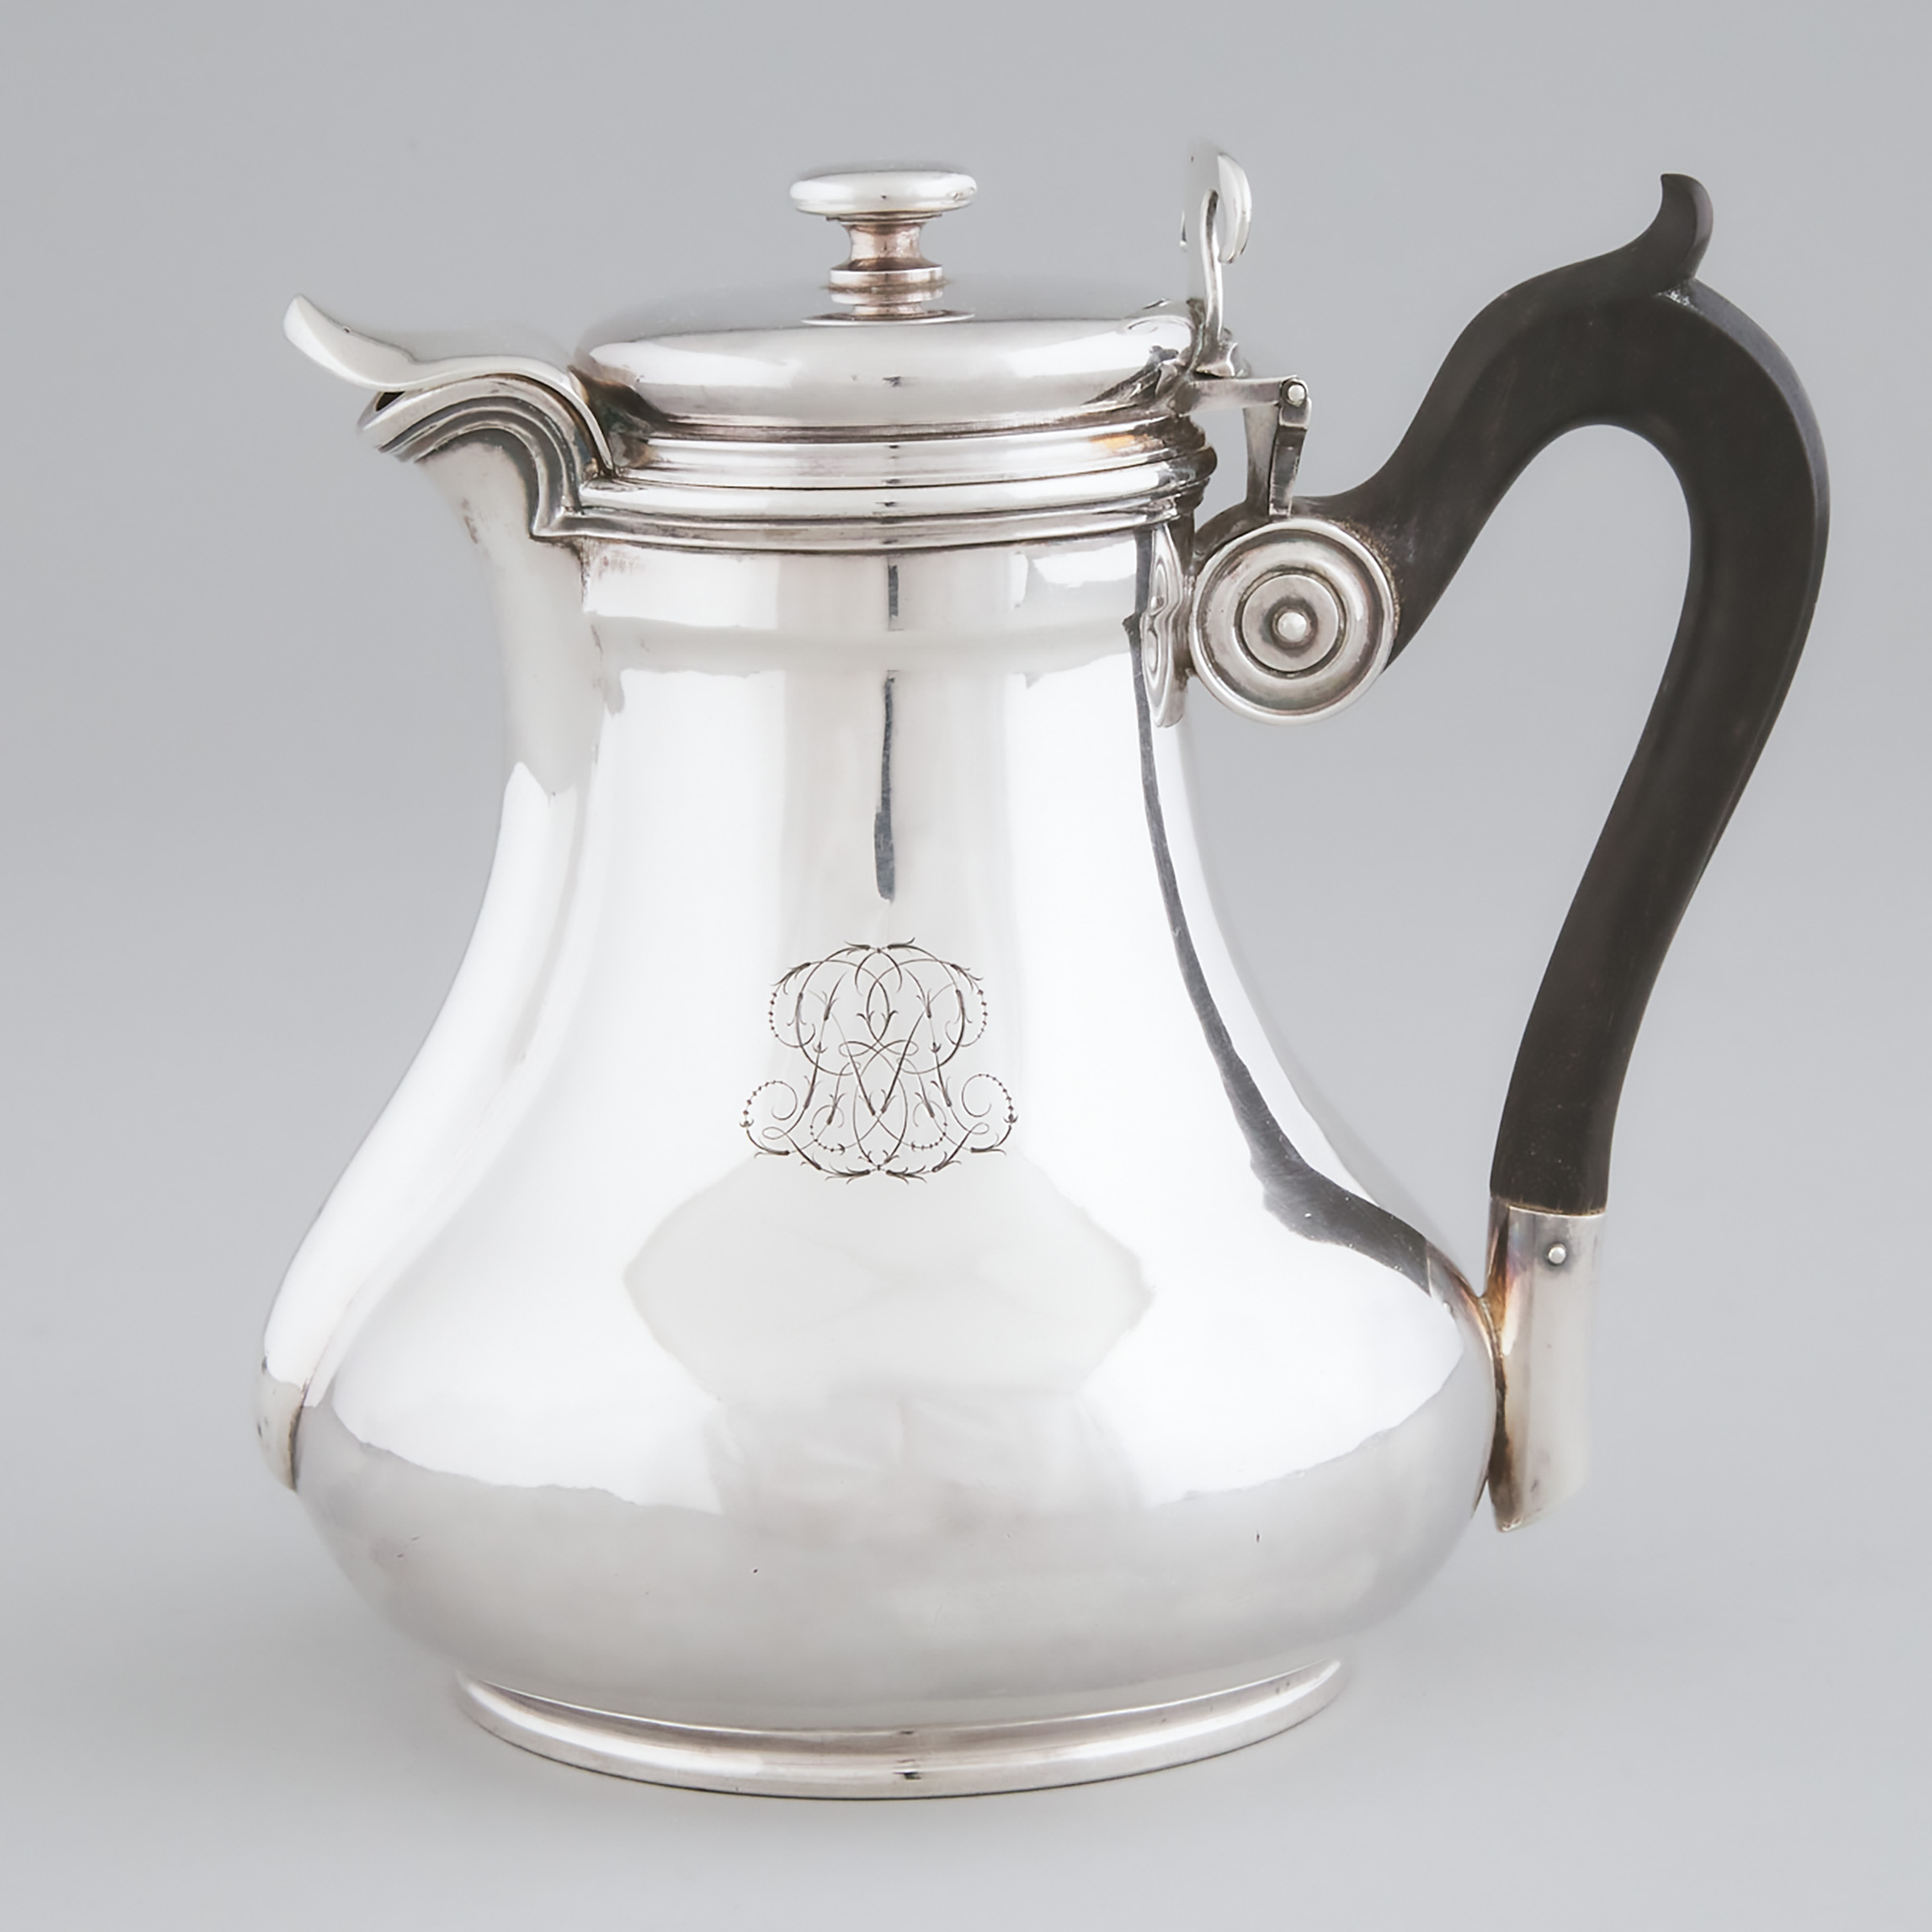 French Silver Hot Water Pot Charles 2a568b